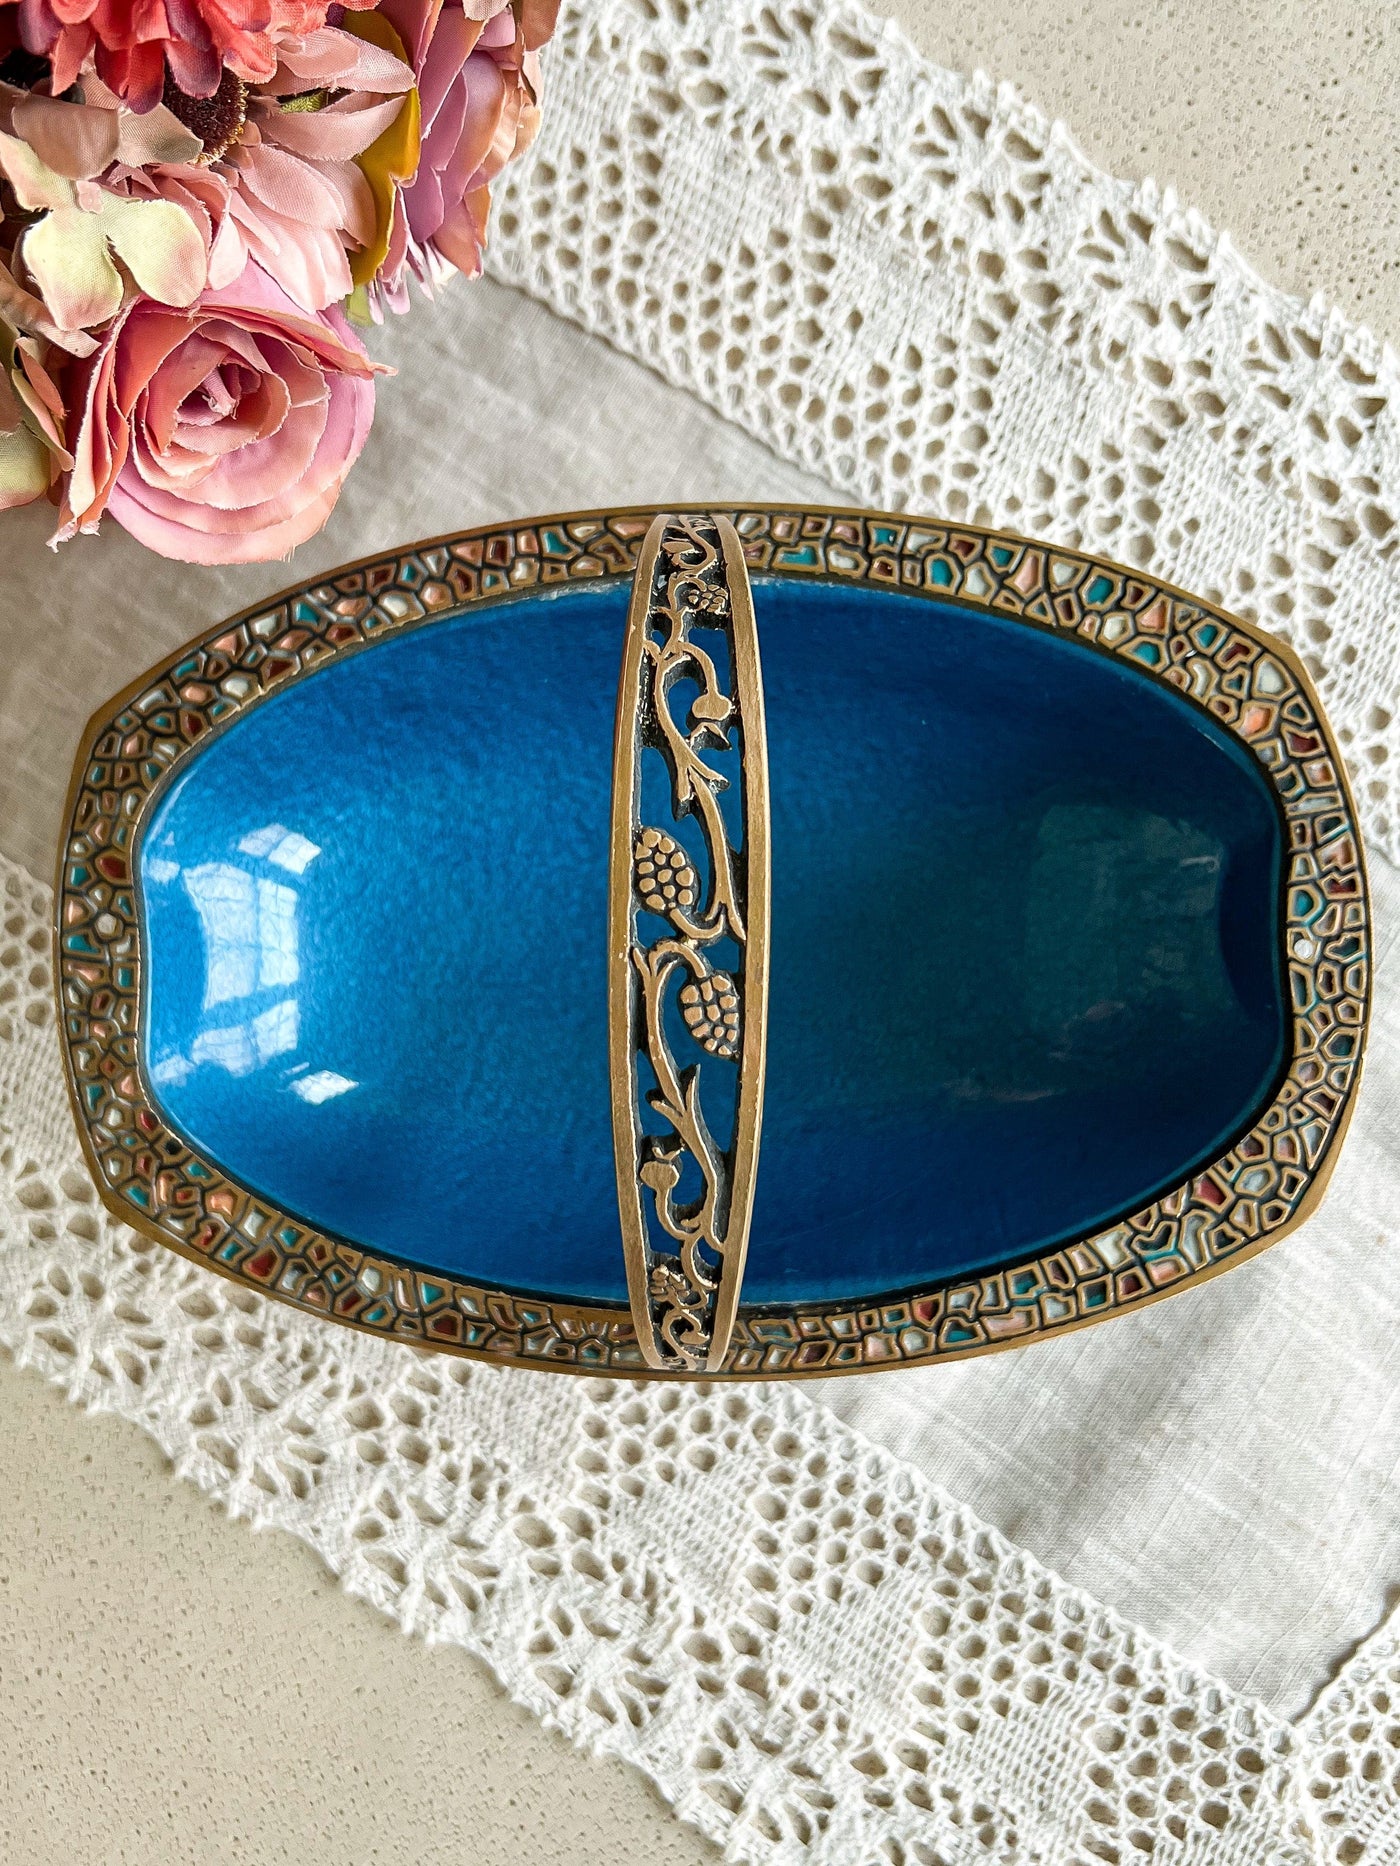 BLUE ENAMEL & BRASS BOWL WITH HANDLE & MOSAIC RIM Revive In Style Vintage Furniture Painted Refinished Redesign Beautiful One of a Kind Artistic Antique Unique Home Decor Interior Design French Country Shabby Chic Cottage Farmhouse Grandmillenial Coastal Chalk Paint Metallic Glam Eclectic Quality Dovetailed Rustic Furniture Painter Pinterest Bedroom Living Room Entryway Kitchen Home Trends House Styles Decorating ideas